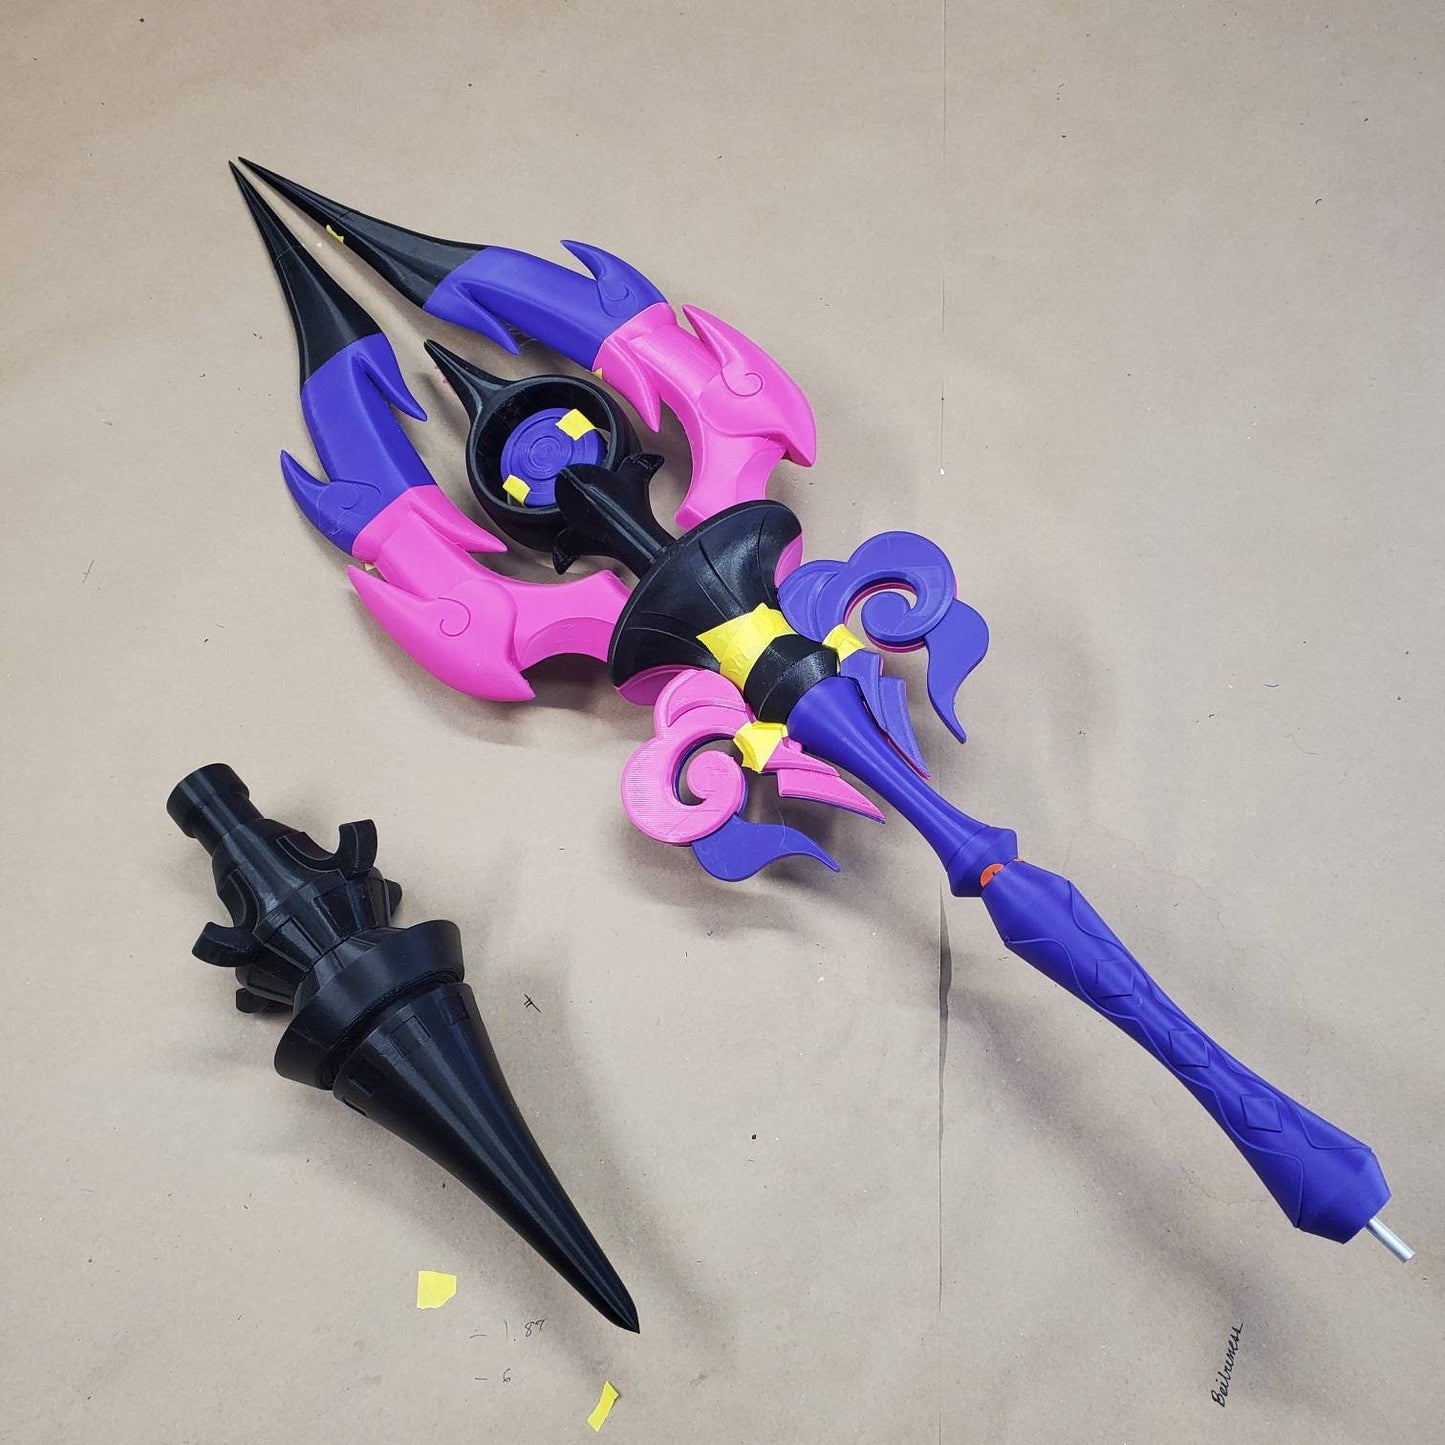 Genshin Impact Staff of homa  Cosplay - 3D printed spear kit